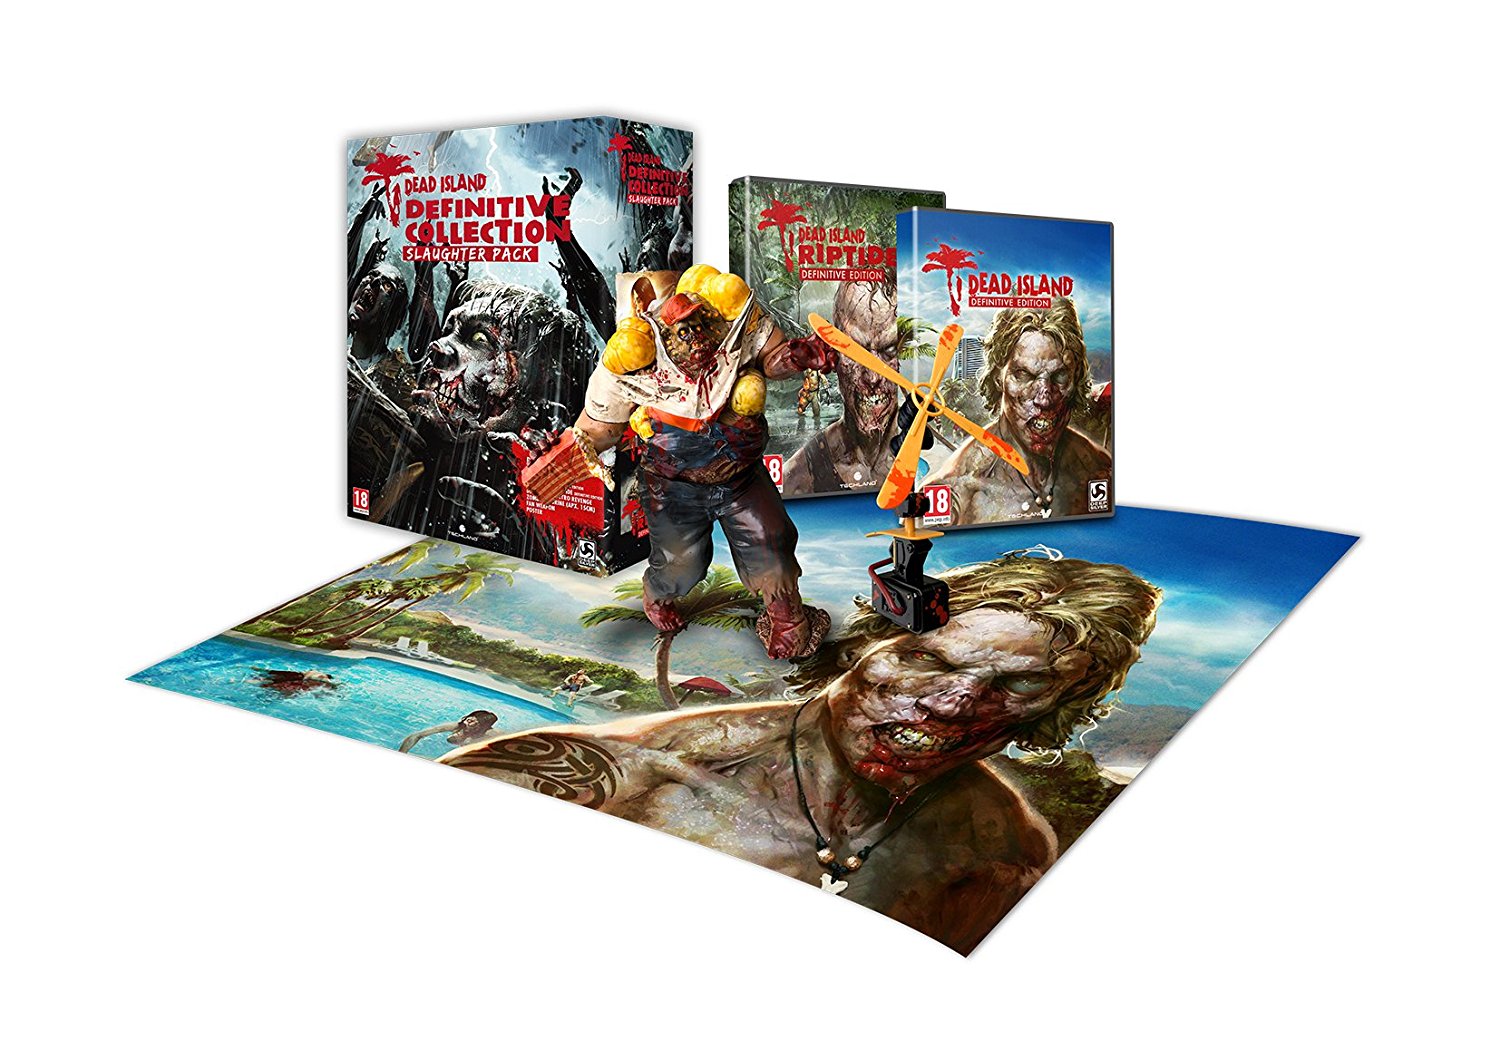 pulp weapons pack dead island 2